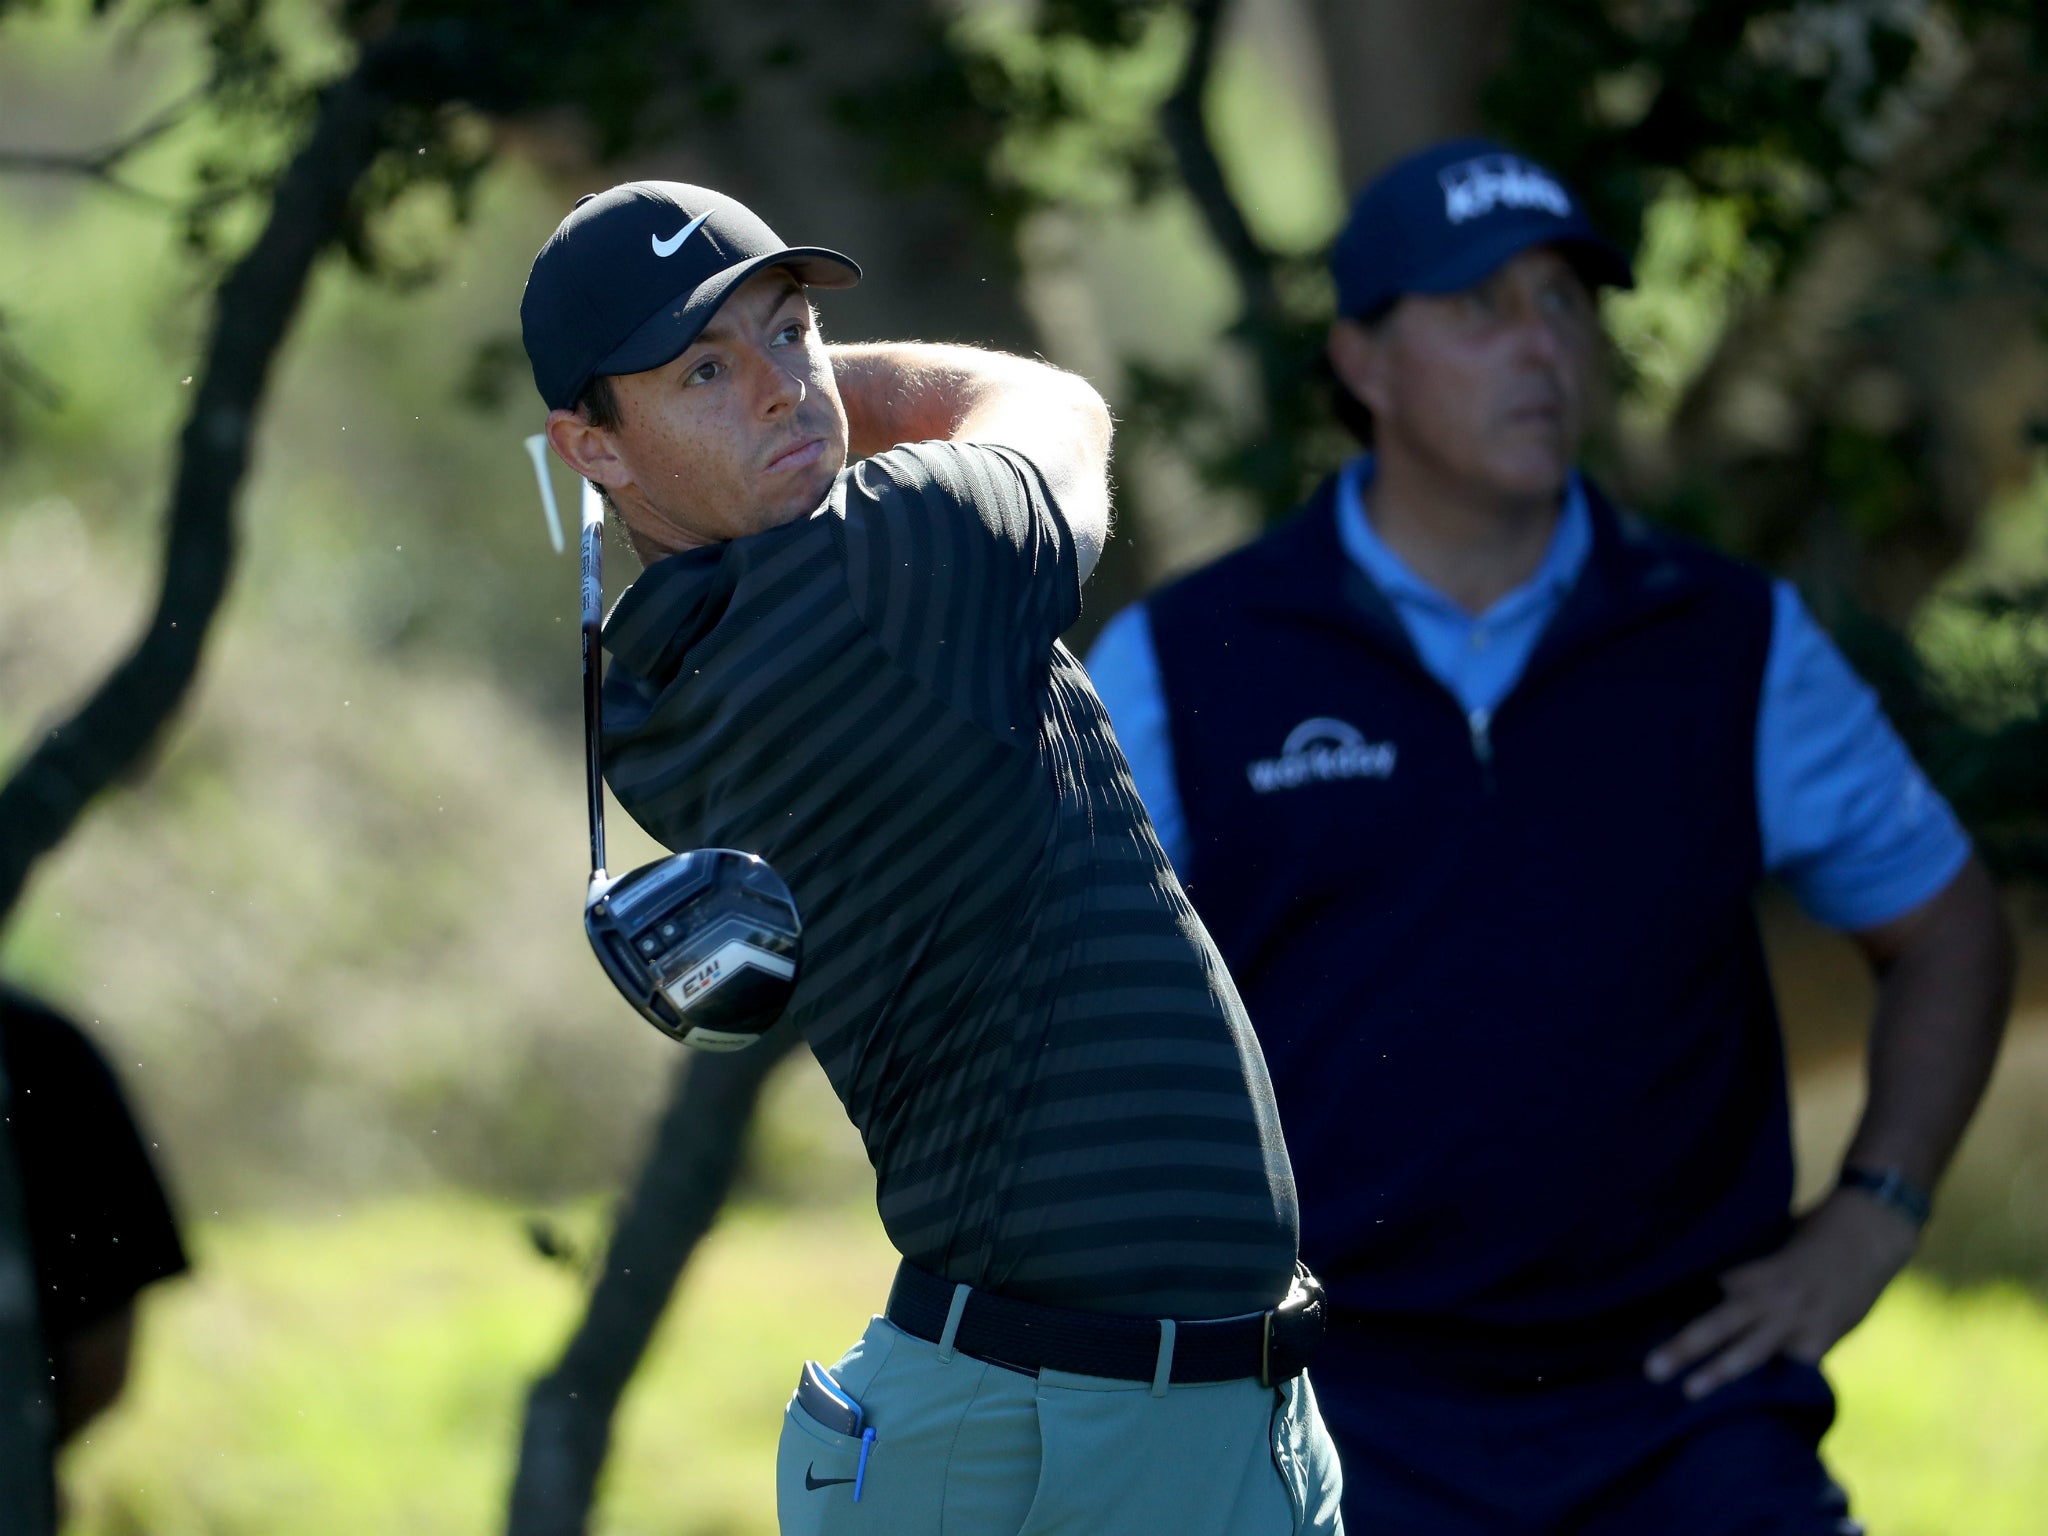 Rory McIlroy hit a disappointing 74 on day two